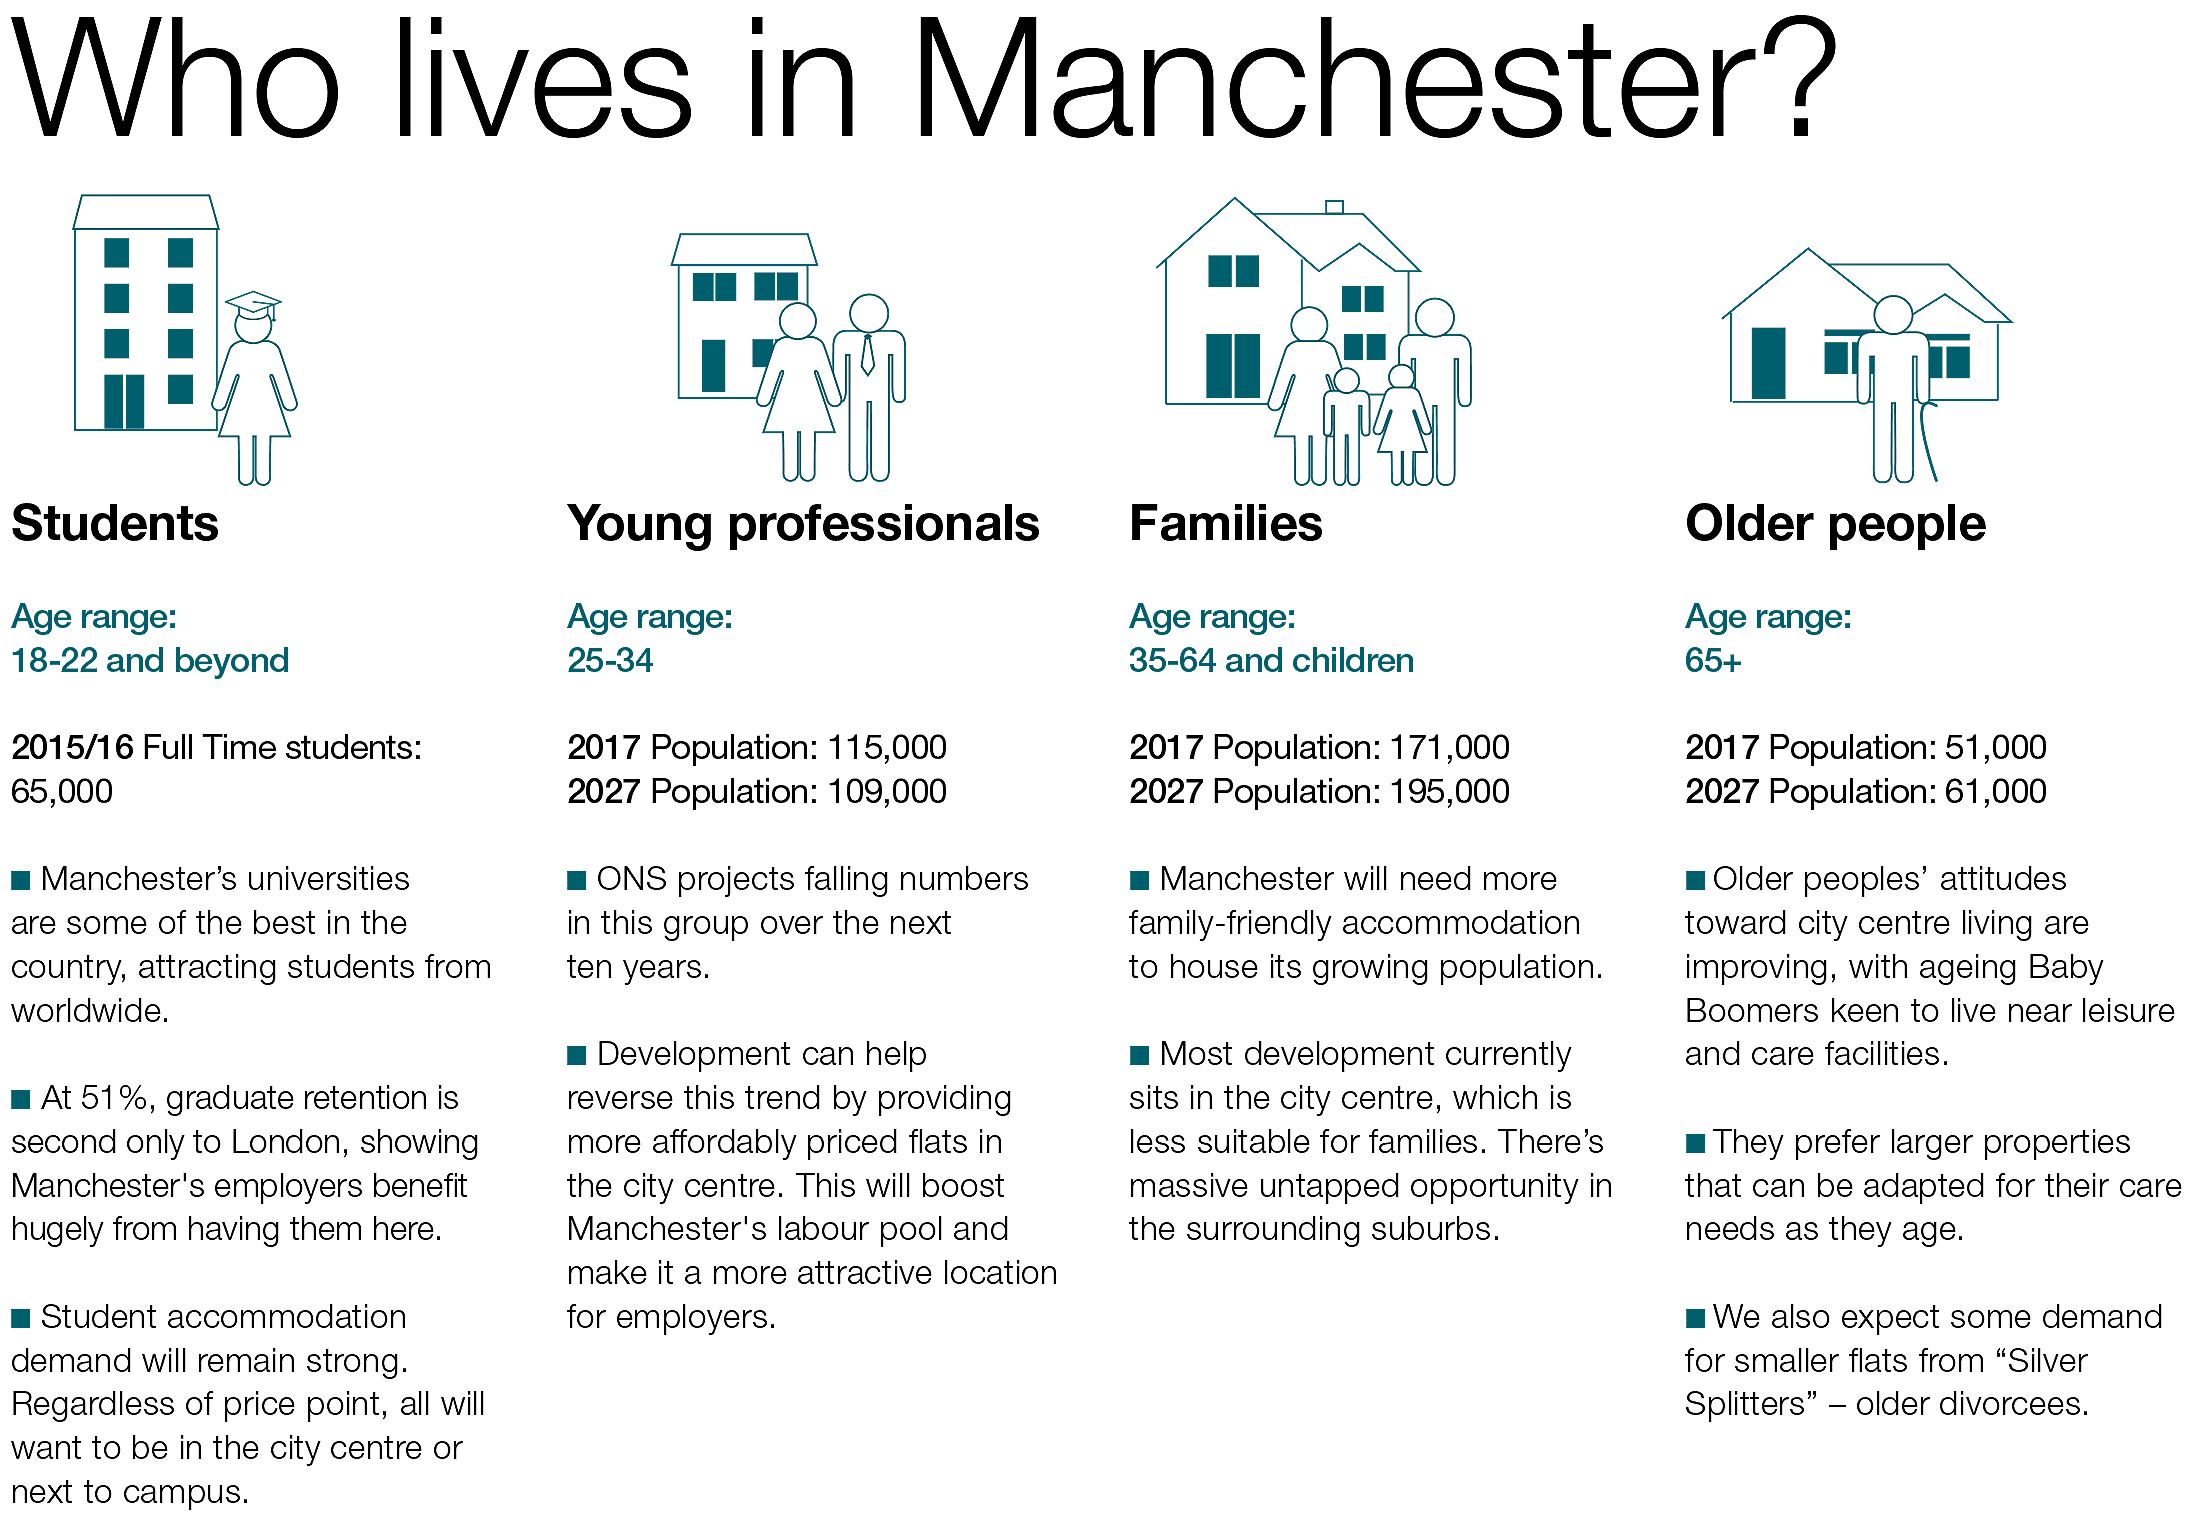 Who lives in Manchester?